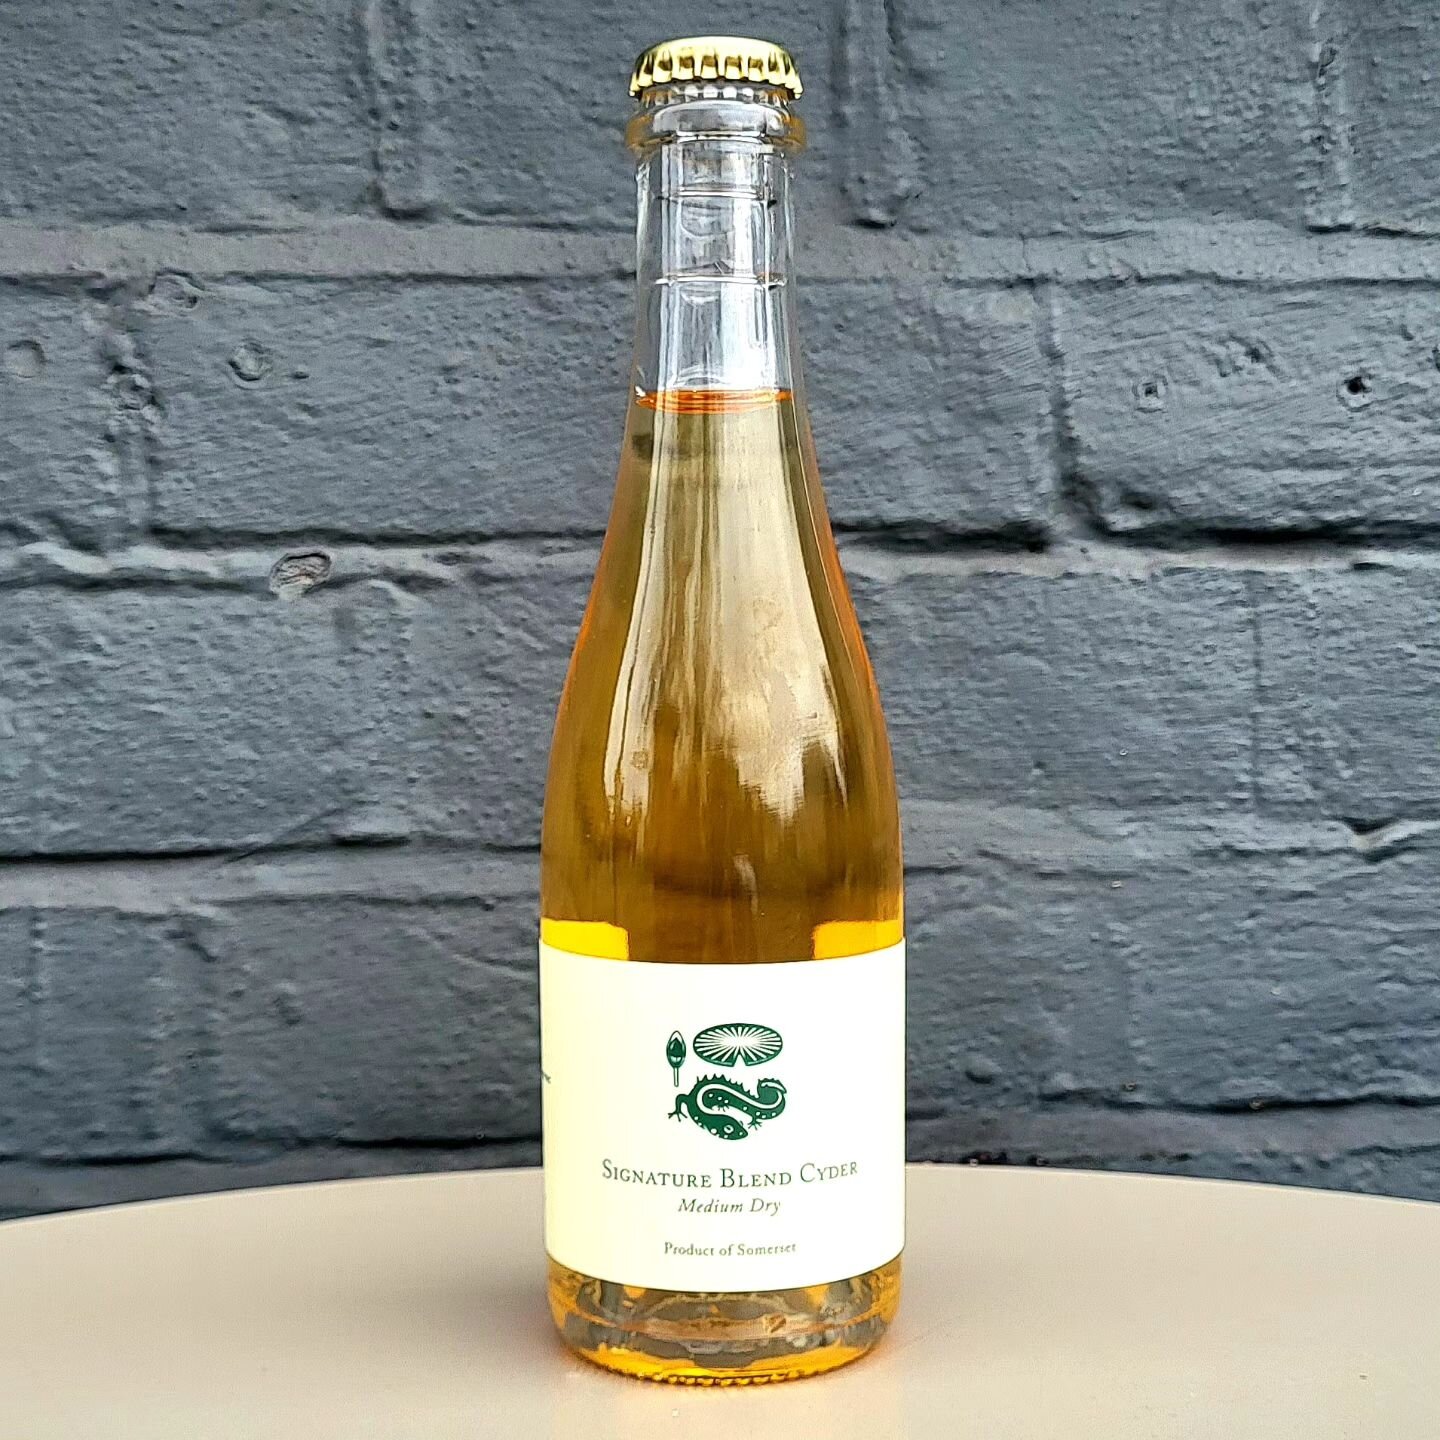 For the last day of #britishciderweek, we bring to you @thenewtinsomerset

Signature Blend Cyder
6%

The signature blend cyder containing over 22 apple varieties, including those picked from their own orchards,  on the estate. A classic West Country 